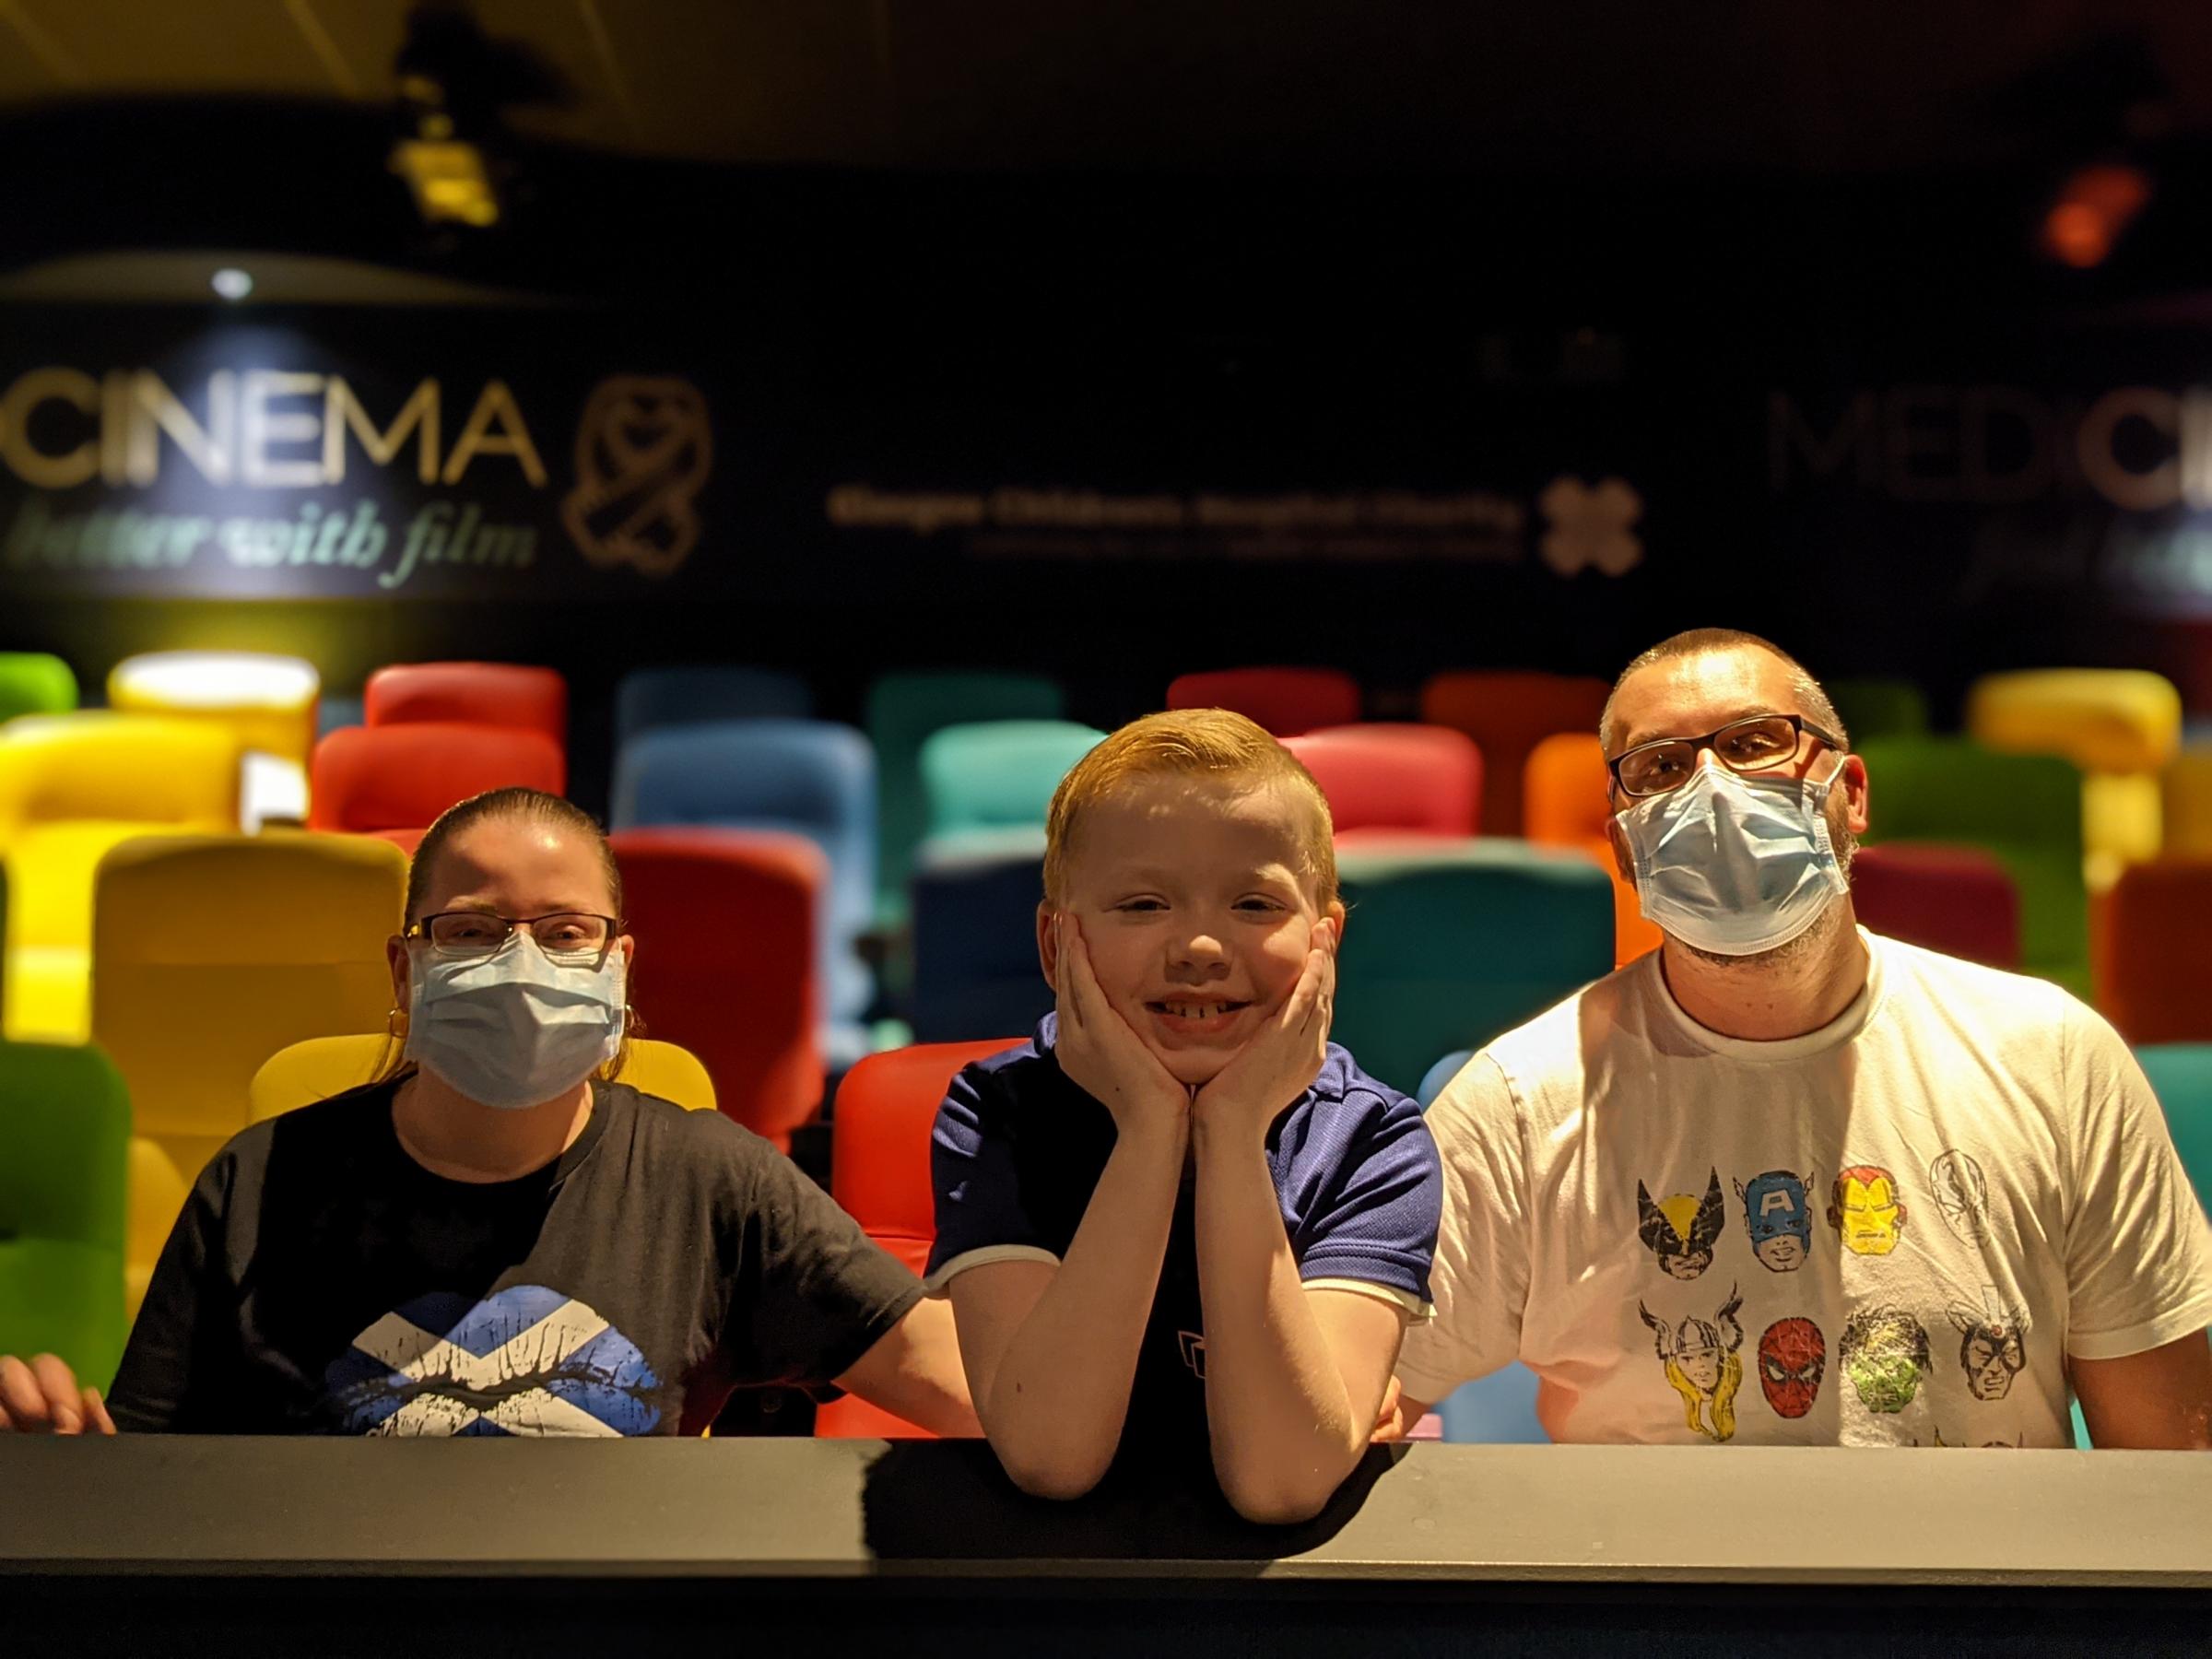 Glasgow patients at Royal Hospital for Children experience movie magic